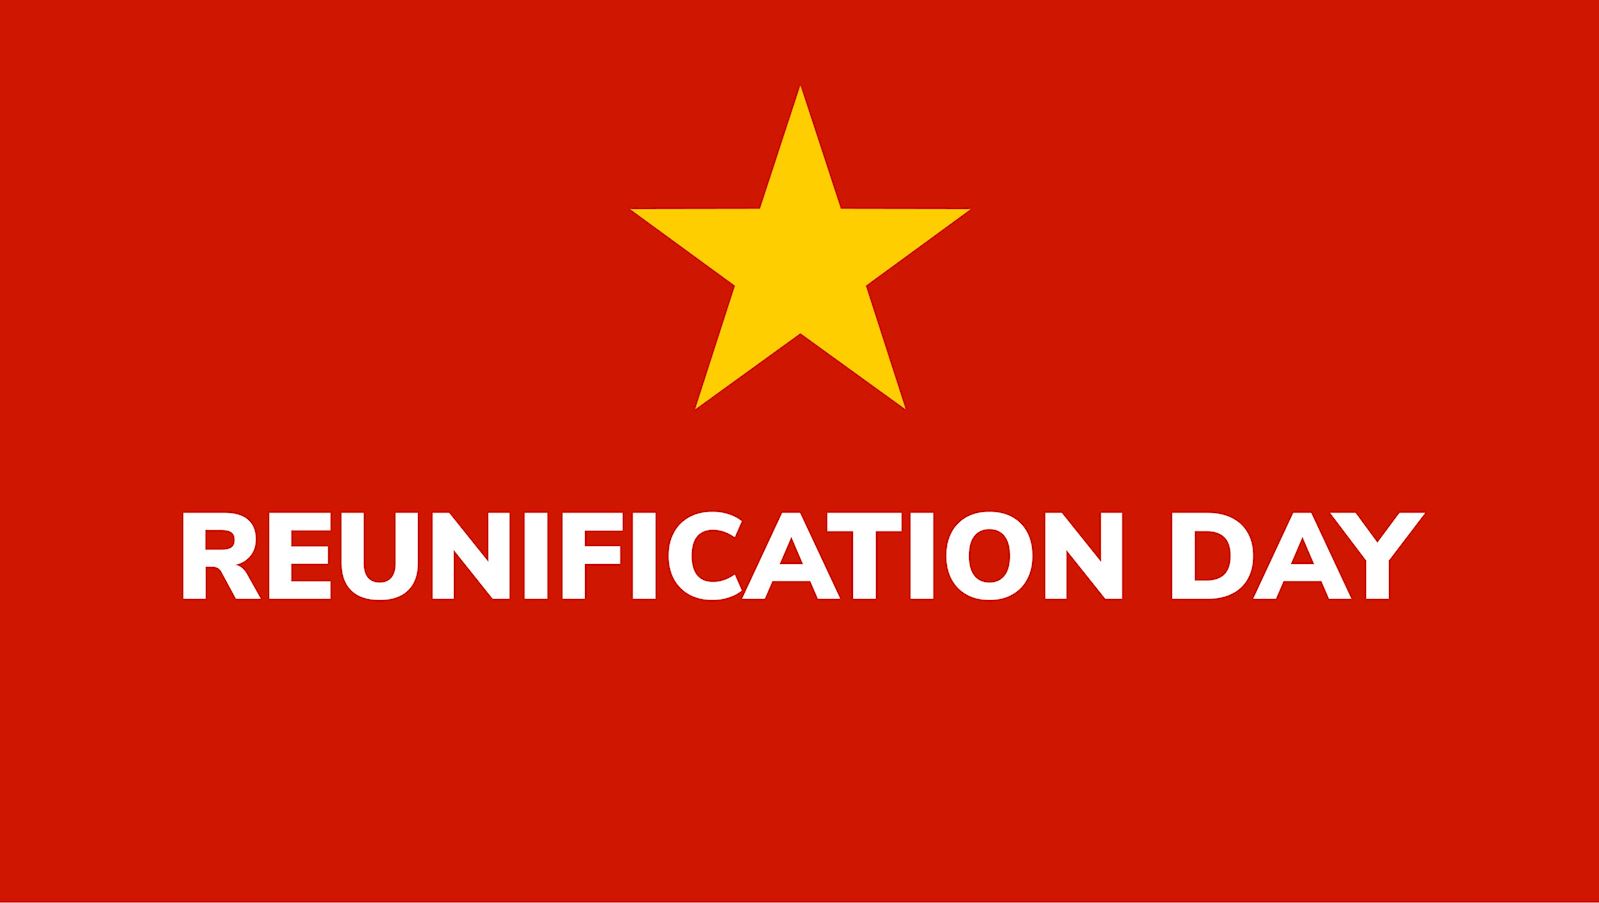 Reunification Day